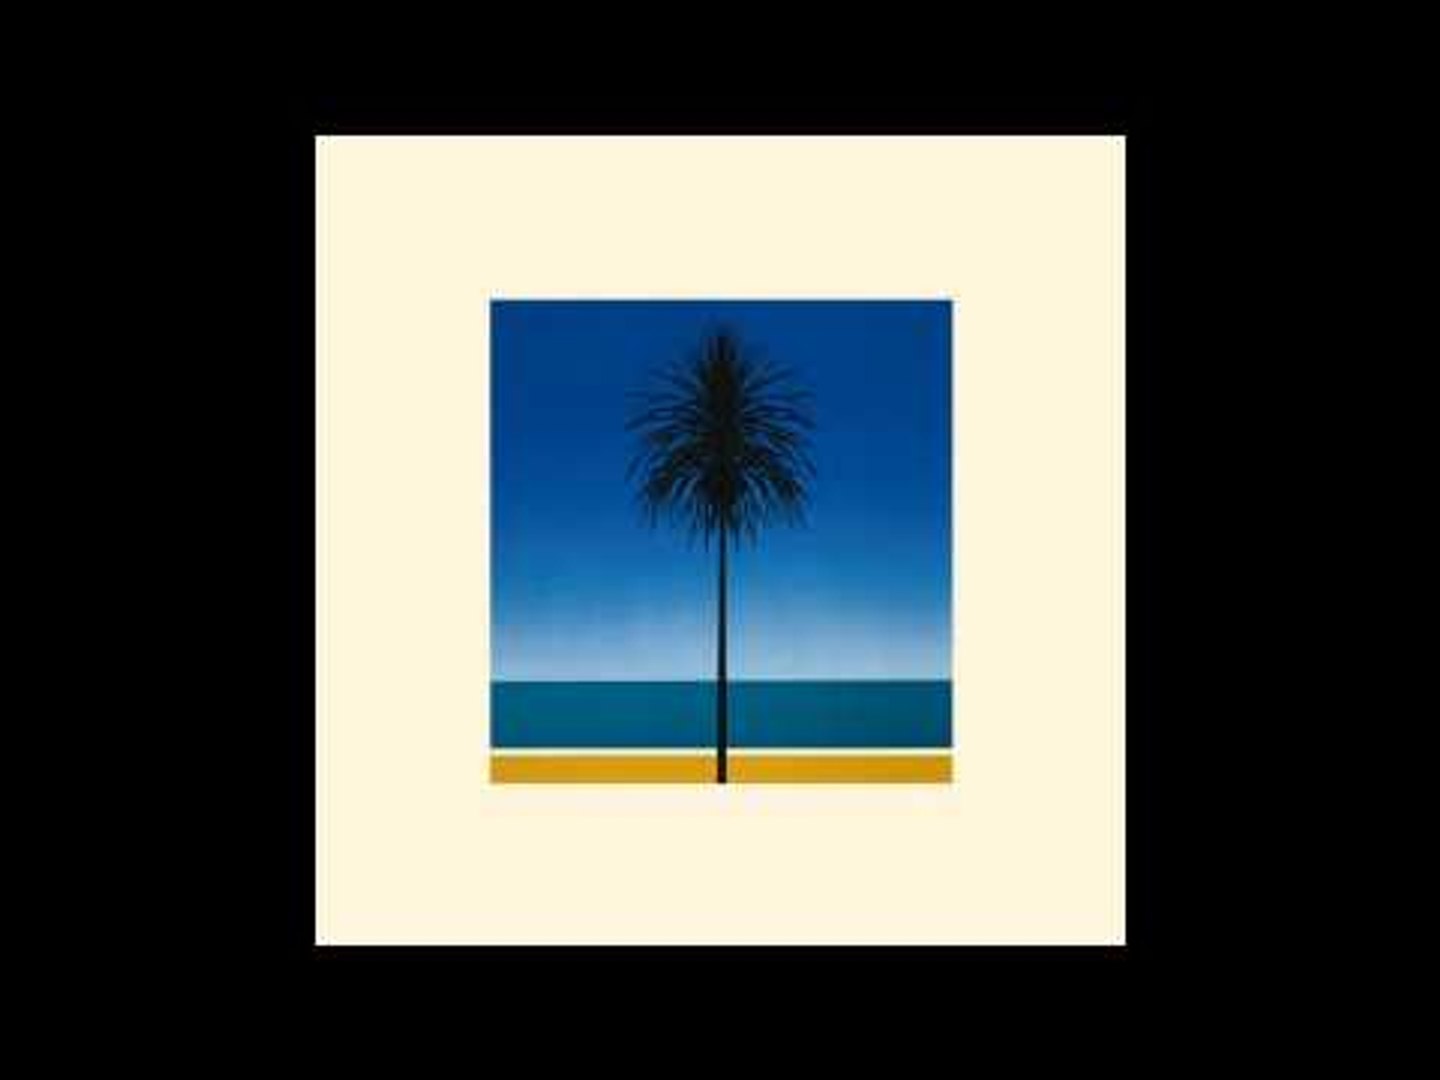 metronomy the look camo and krooked remix